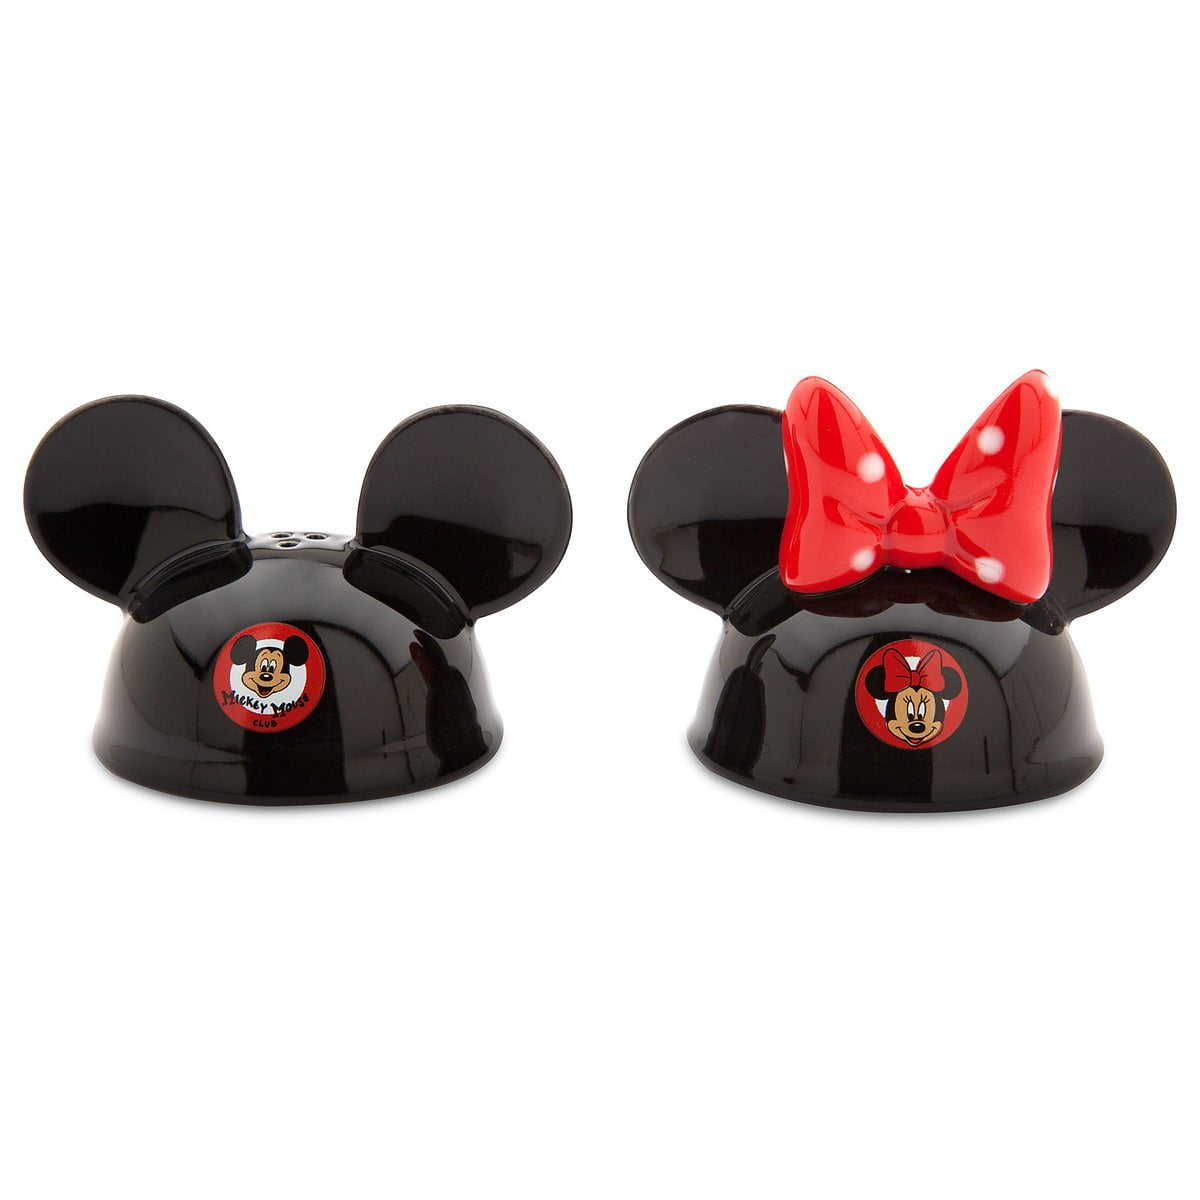 Disney Parks Mouse Ware Mickey And Minnie Tea Cup Salt And Pepper